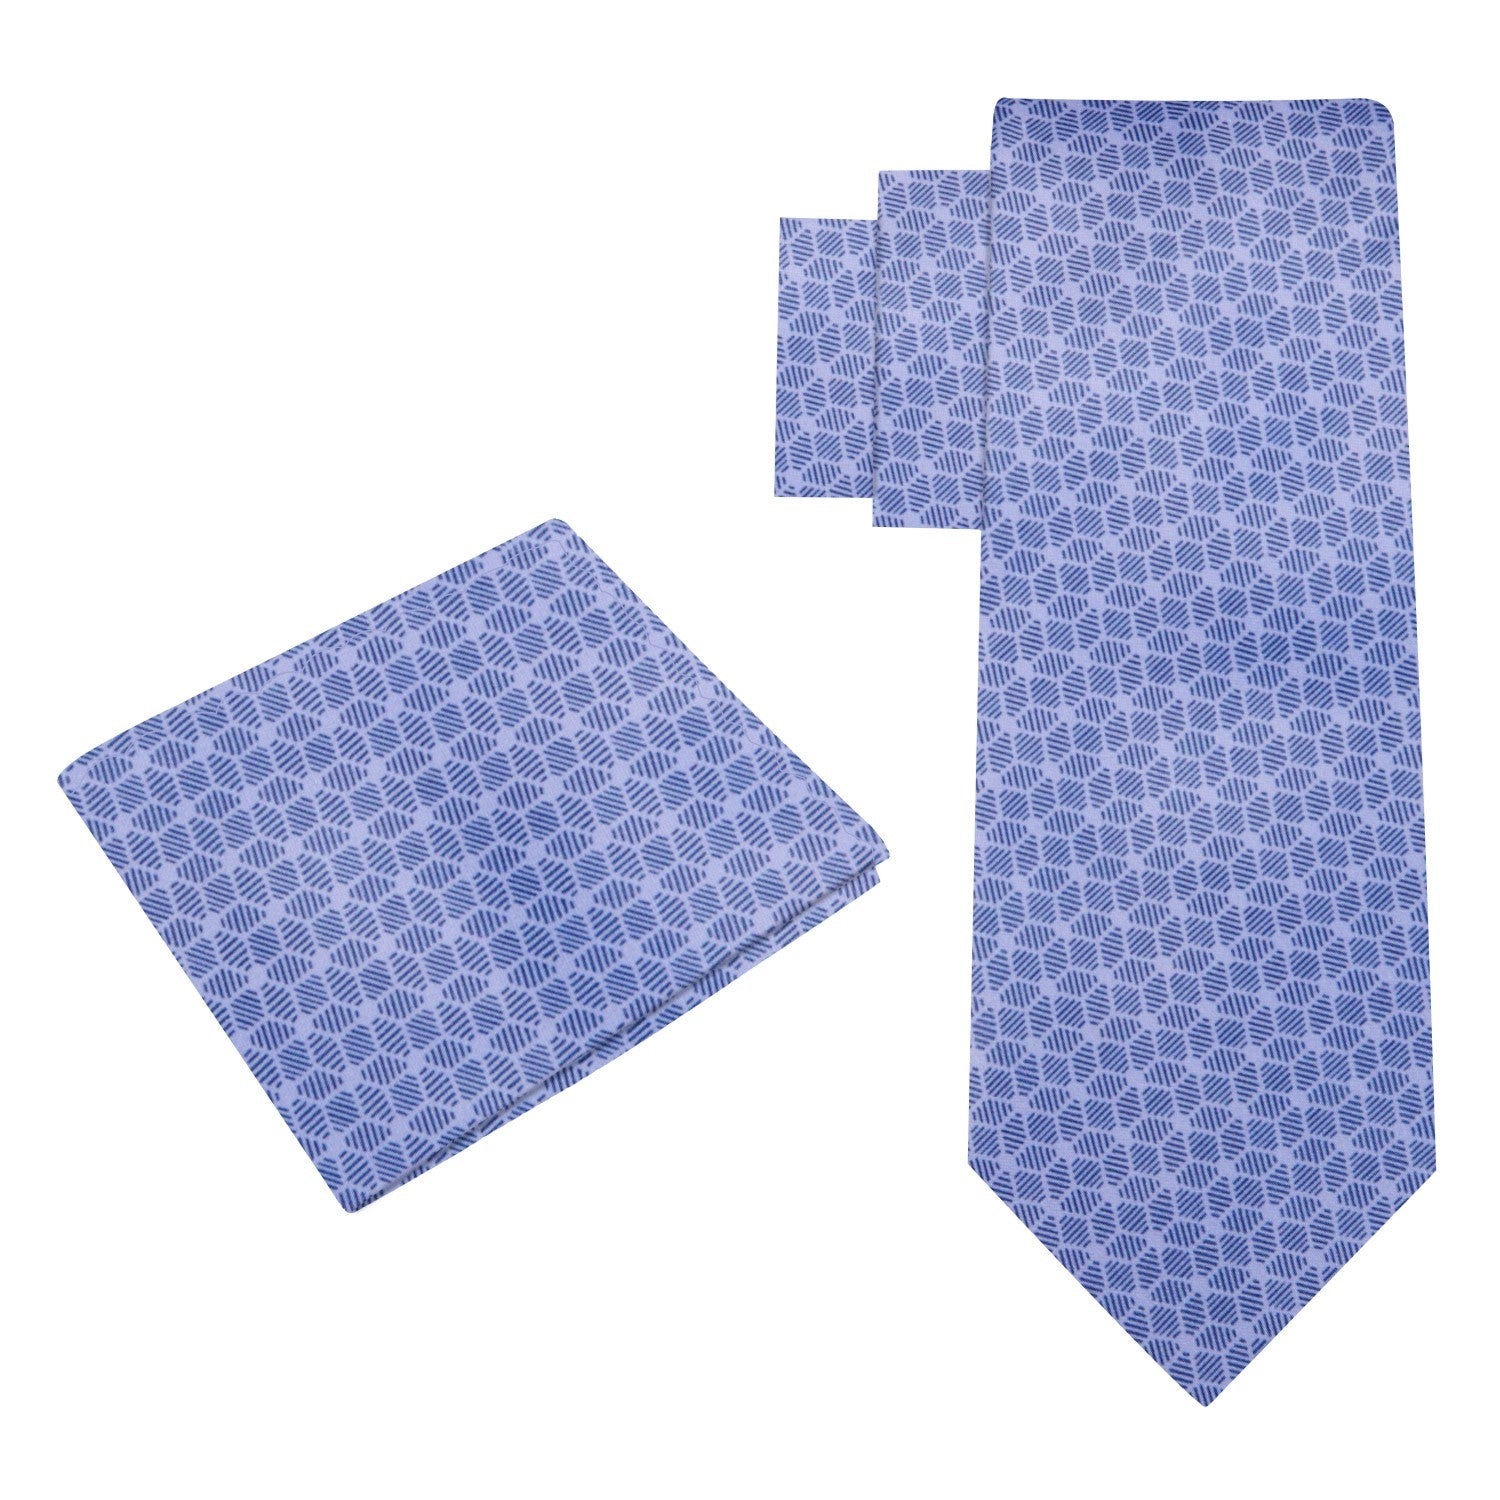 View 2: Deep Periwinkle, Blue 3D Cubes Tie and Pocket Square